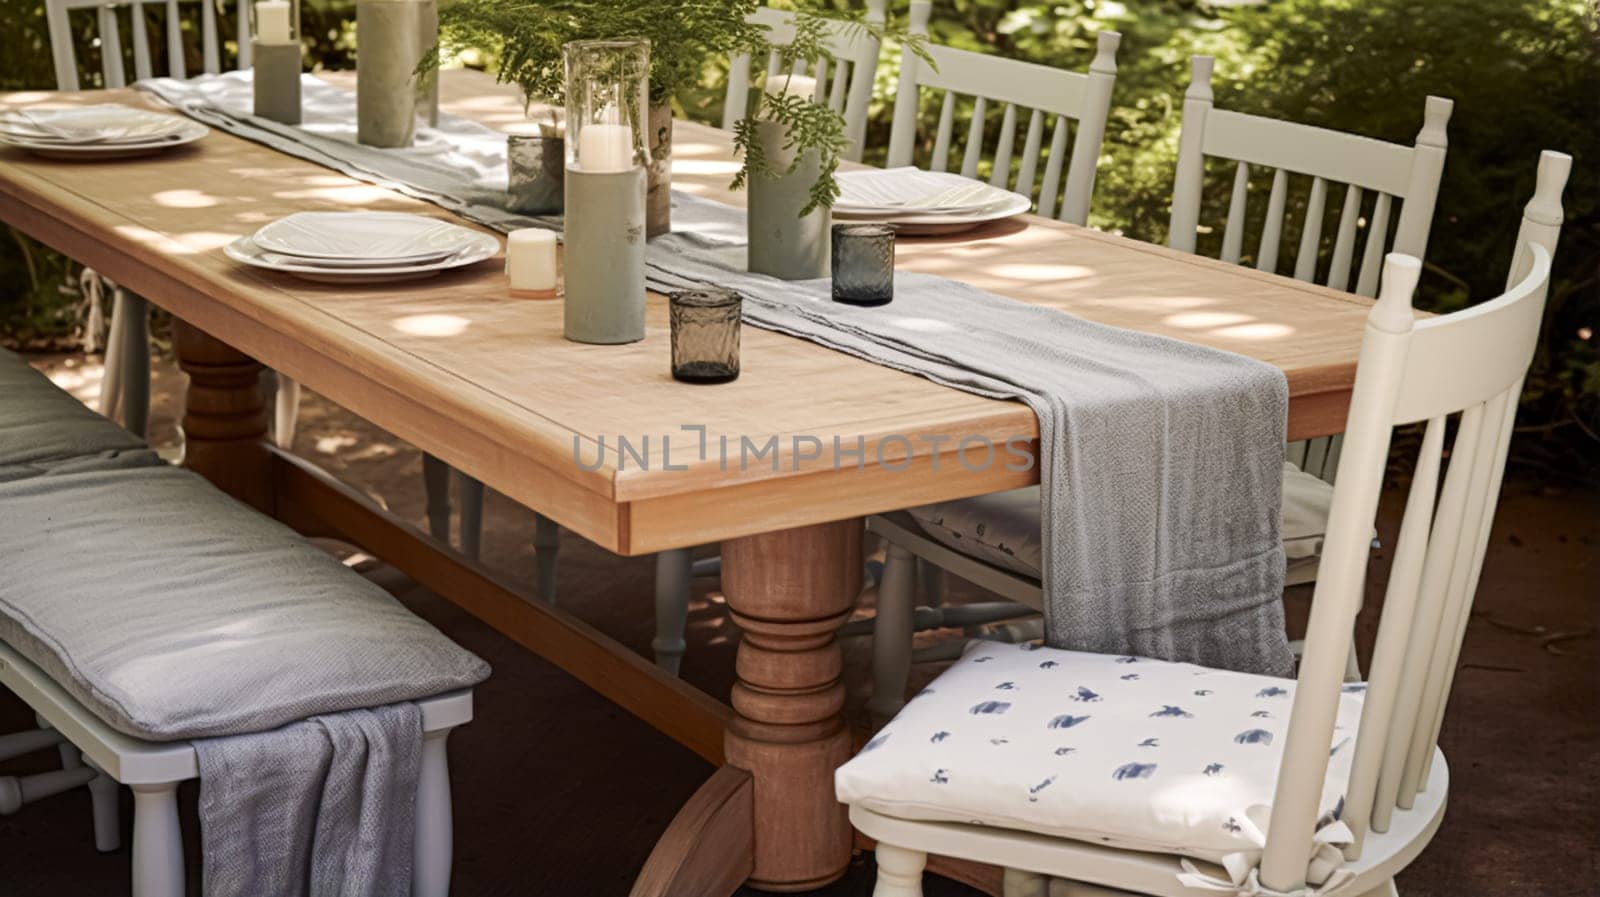 Farmhouse outdoor dining furniture, interior design and garden, wooden table with chairs, furniture and home decor, country cottage style interiors